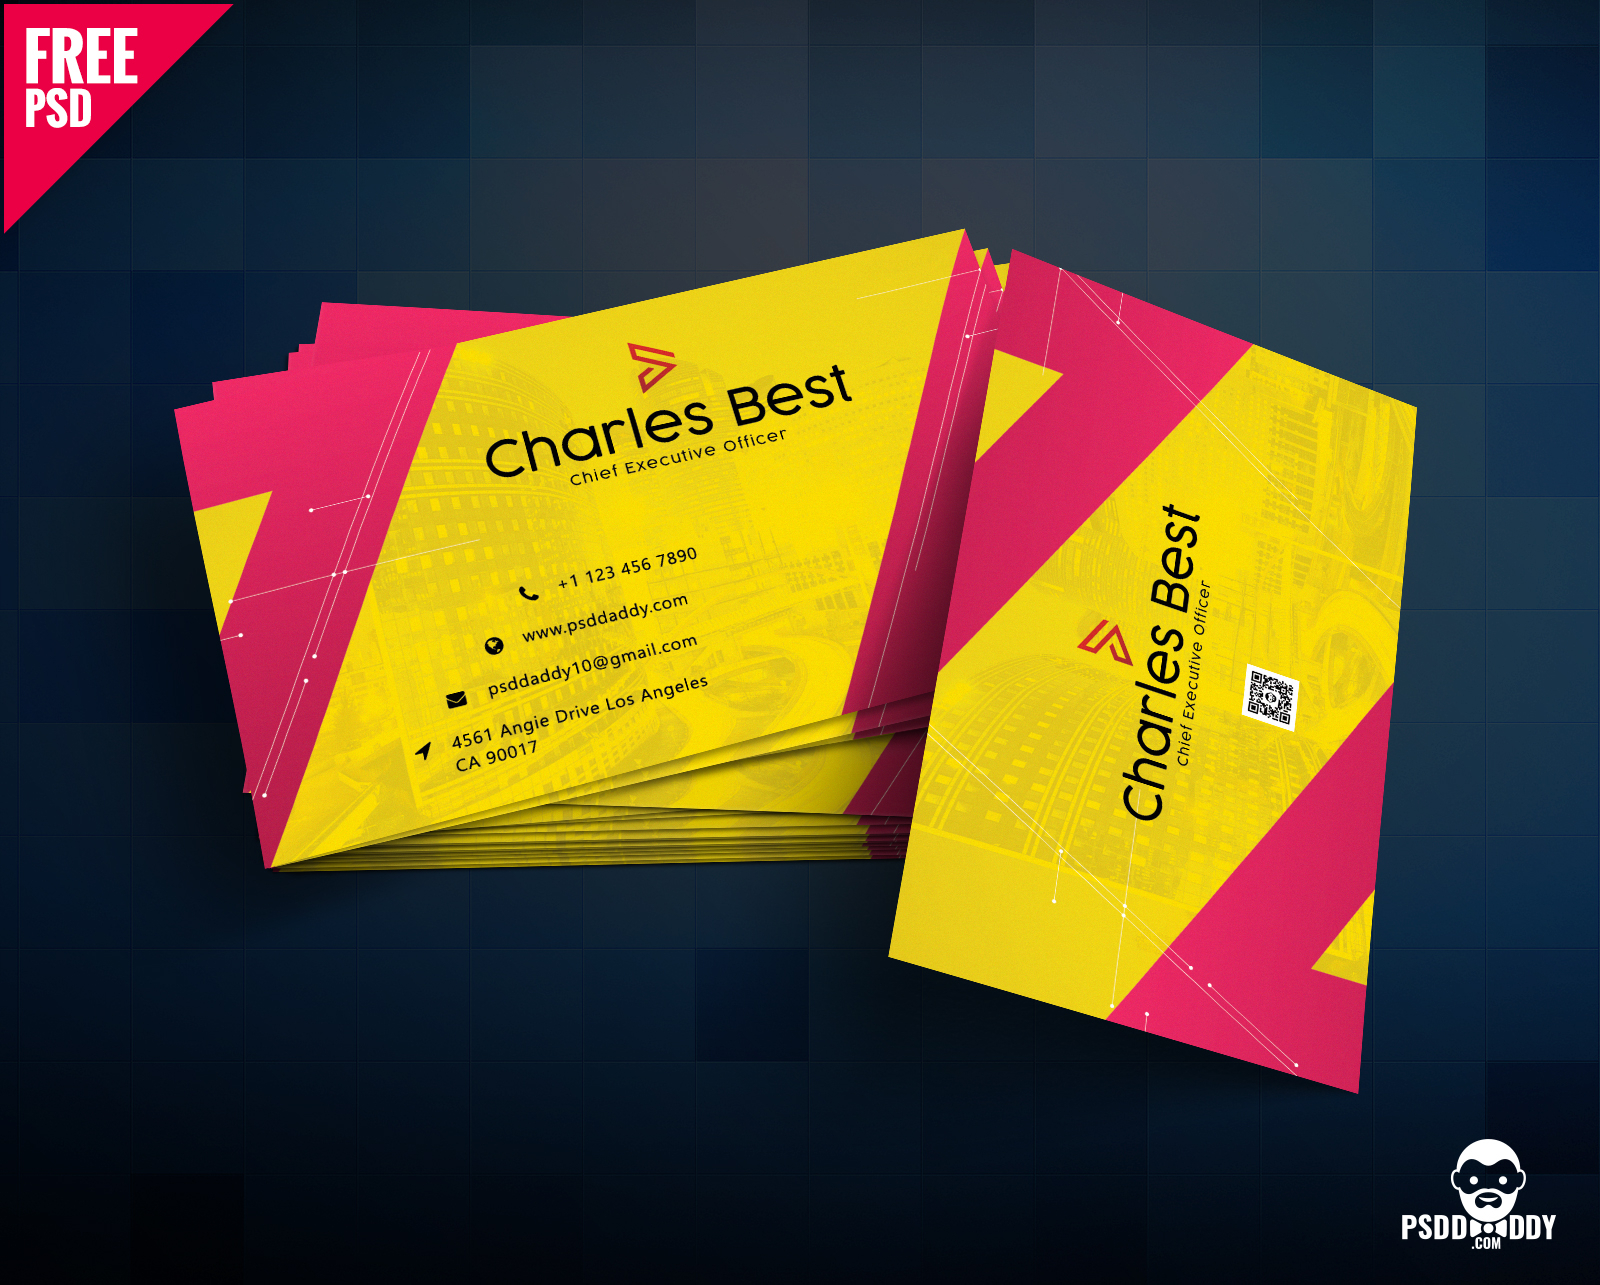 Download] Creative Business Card Free Psd | Psddaddy Pertaining To Free Business Card Templates In Psd Format